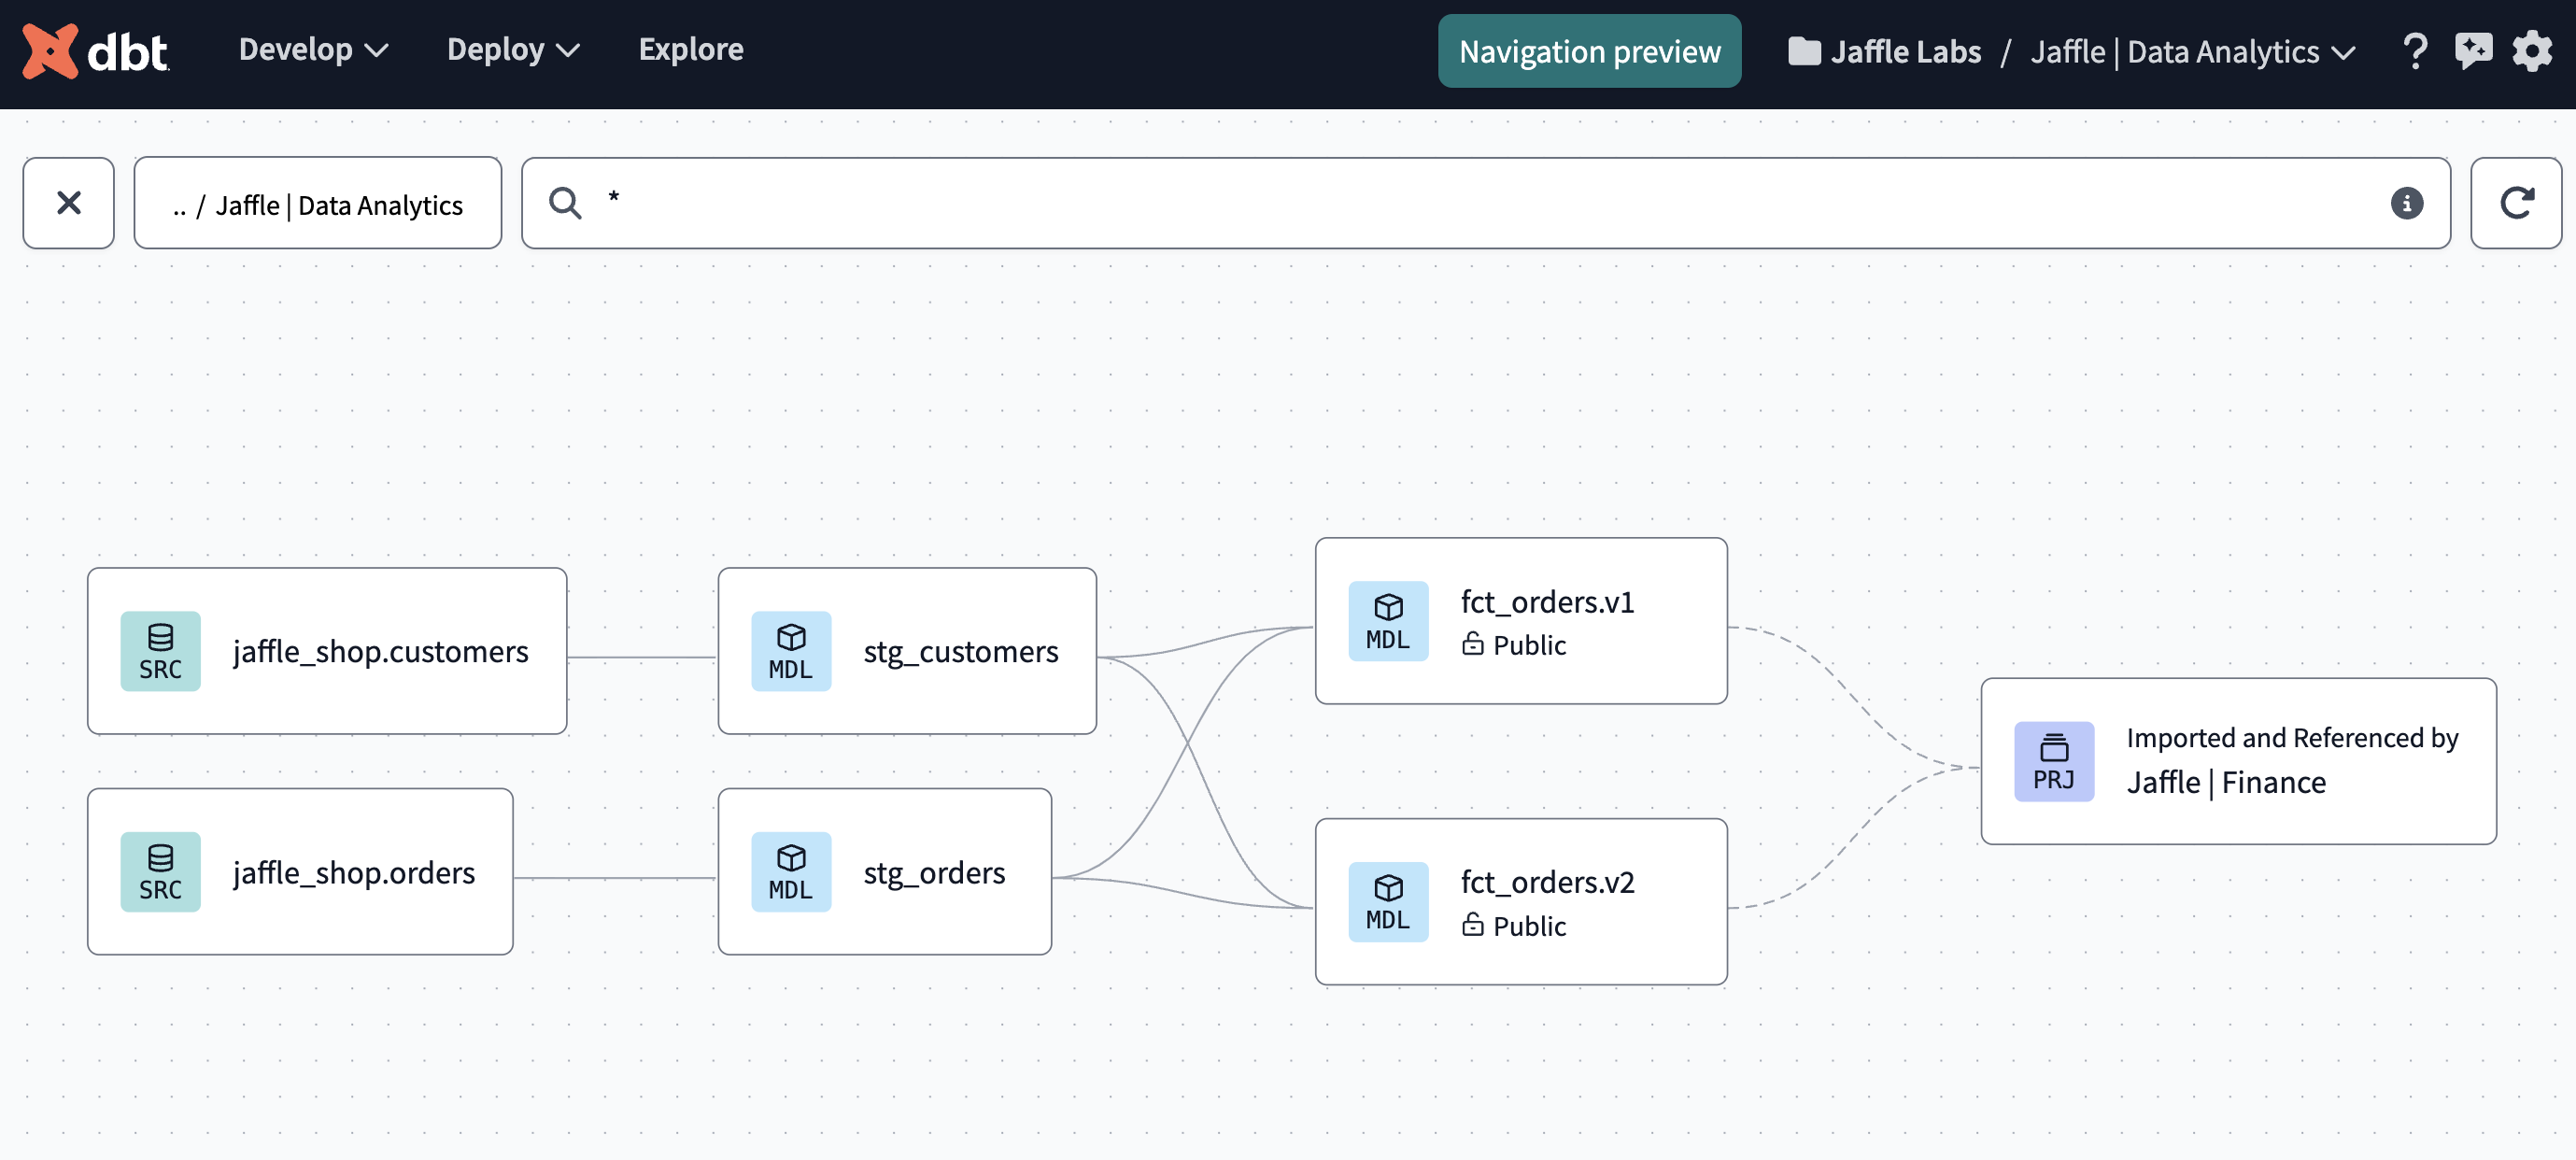 View 'Jaffle | Data Analytics' lineage with dbt Explorer 